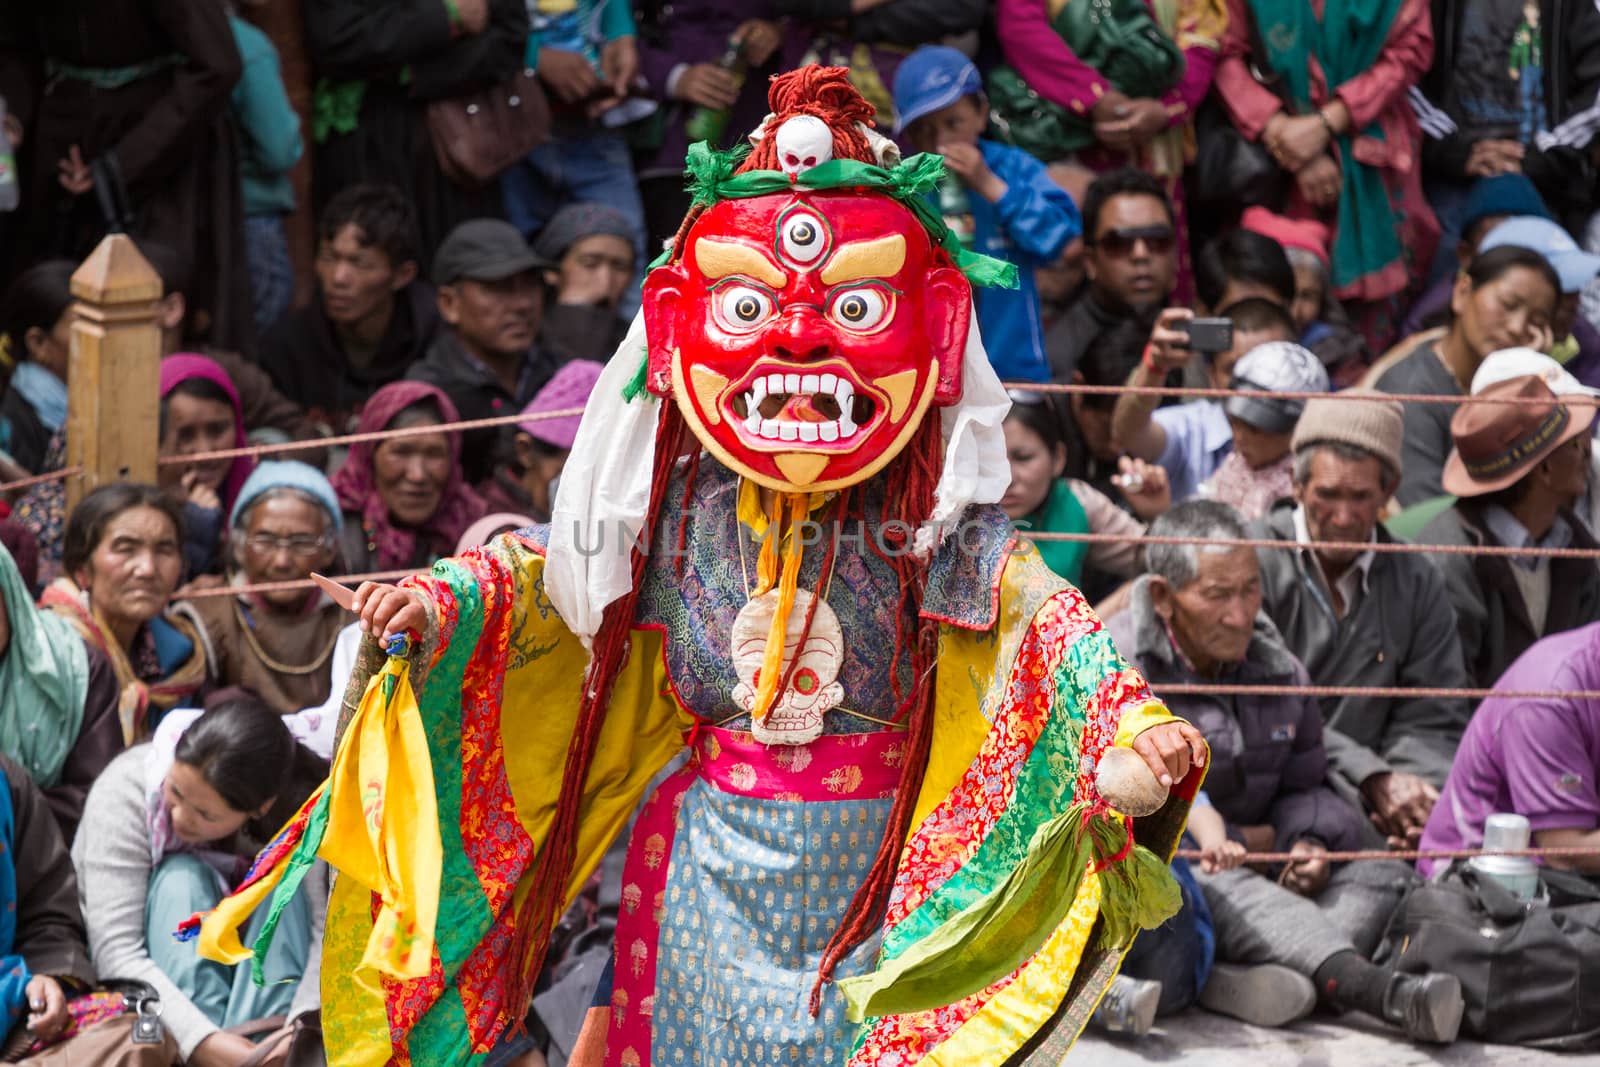 Unidentified monk with phurpa performs a religious masked and costumed mystery dance of Tibetan Buddhism during the Cham Dance Festival by straannick